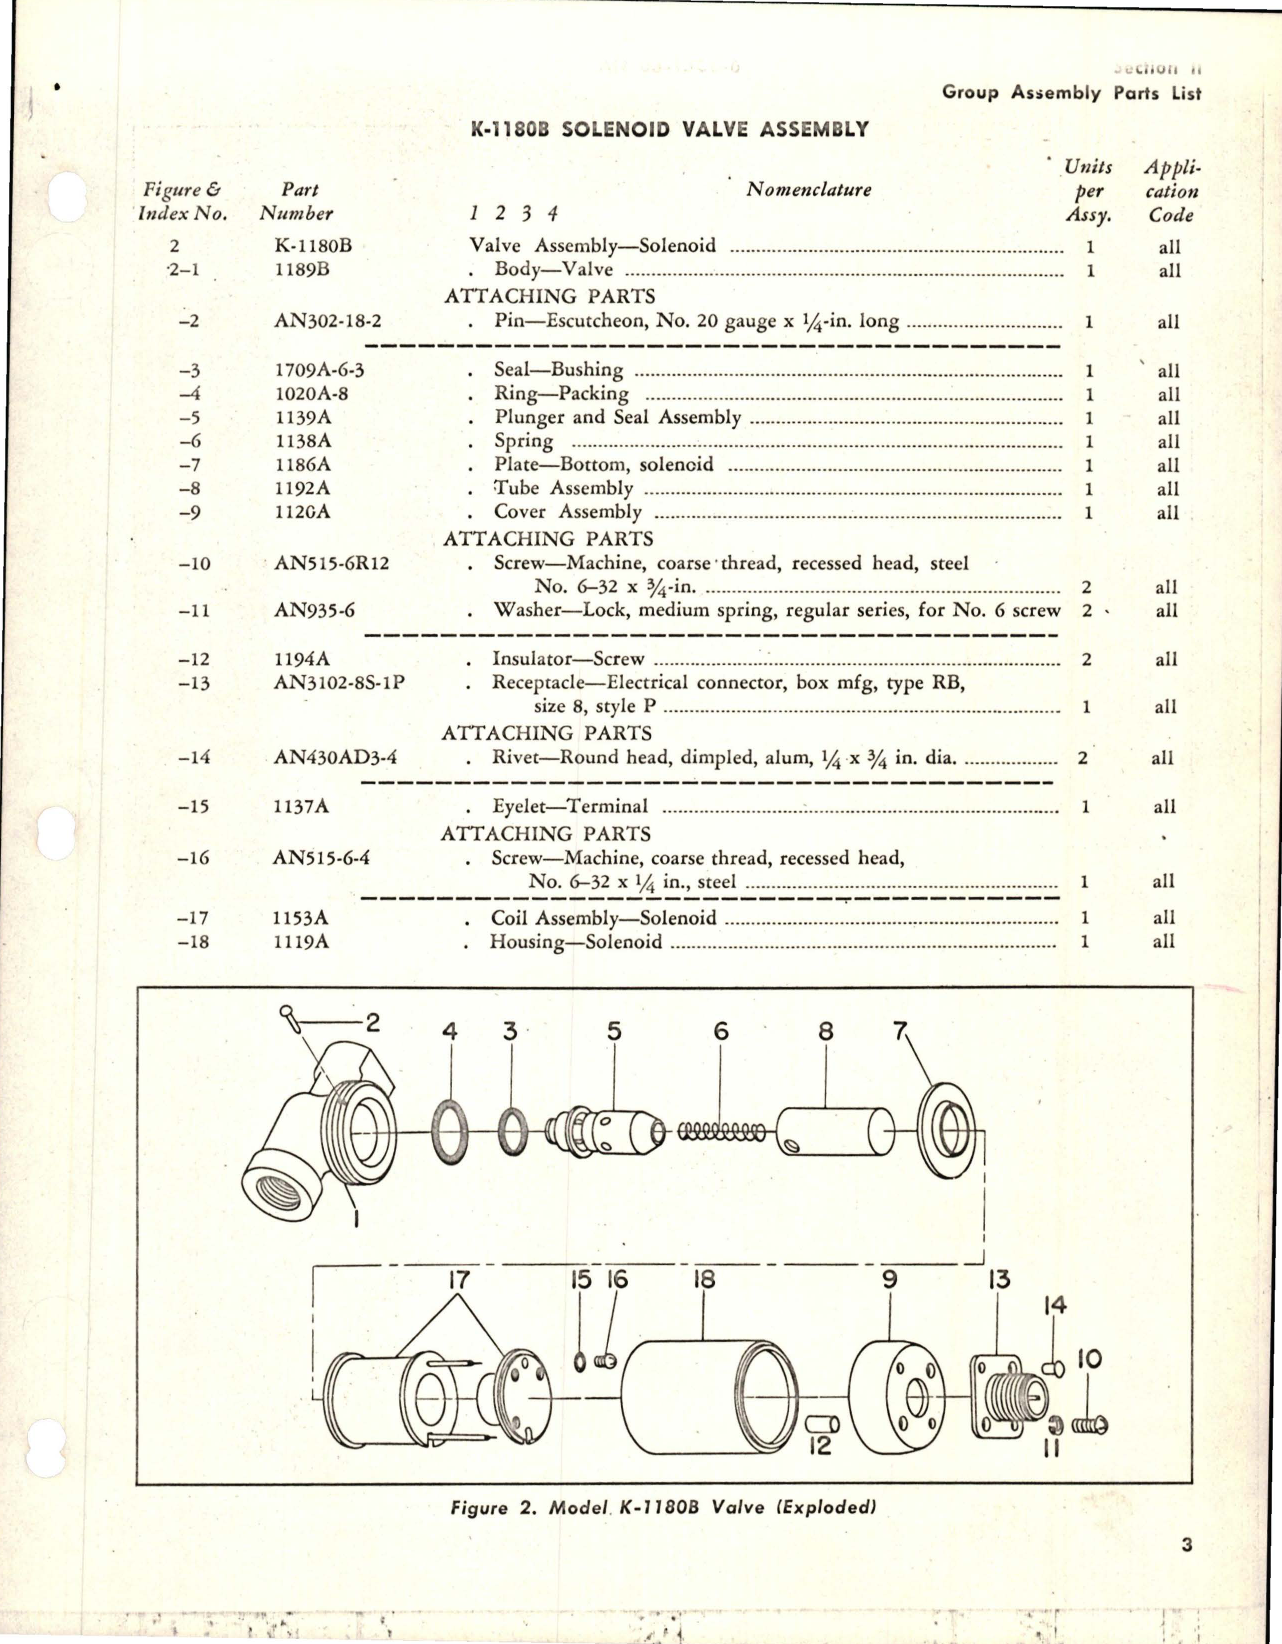 Sample page 5 from AirCorps Library document: Parts Catalog for Solenoid Valves - K-1100, K-1200 and 12,000 Series